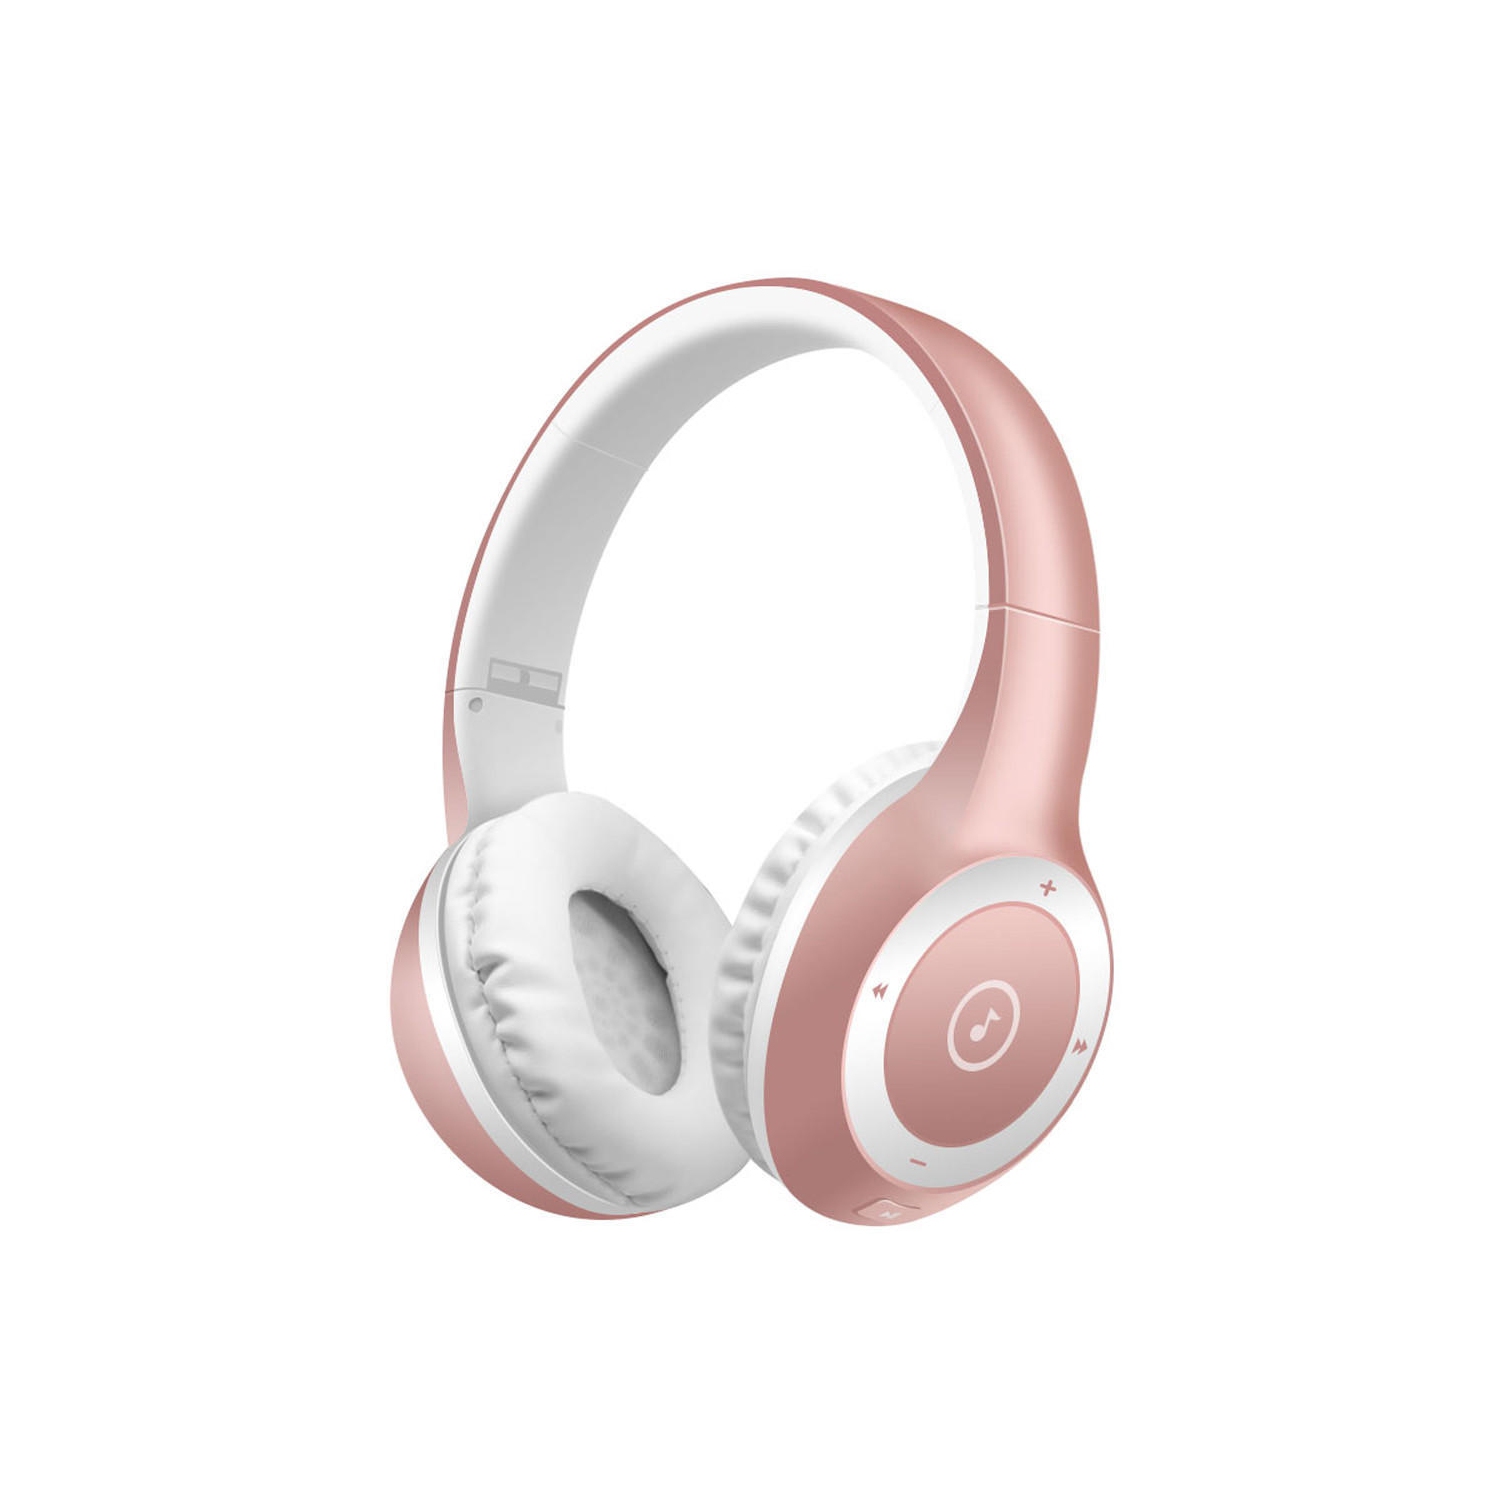 T8 Stereo Bluetooth Over- Ear Headphones Wireless Folding Headset with Microphone - Rose Gold